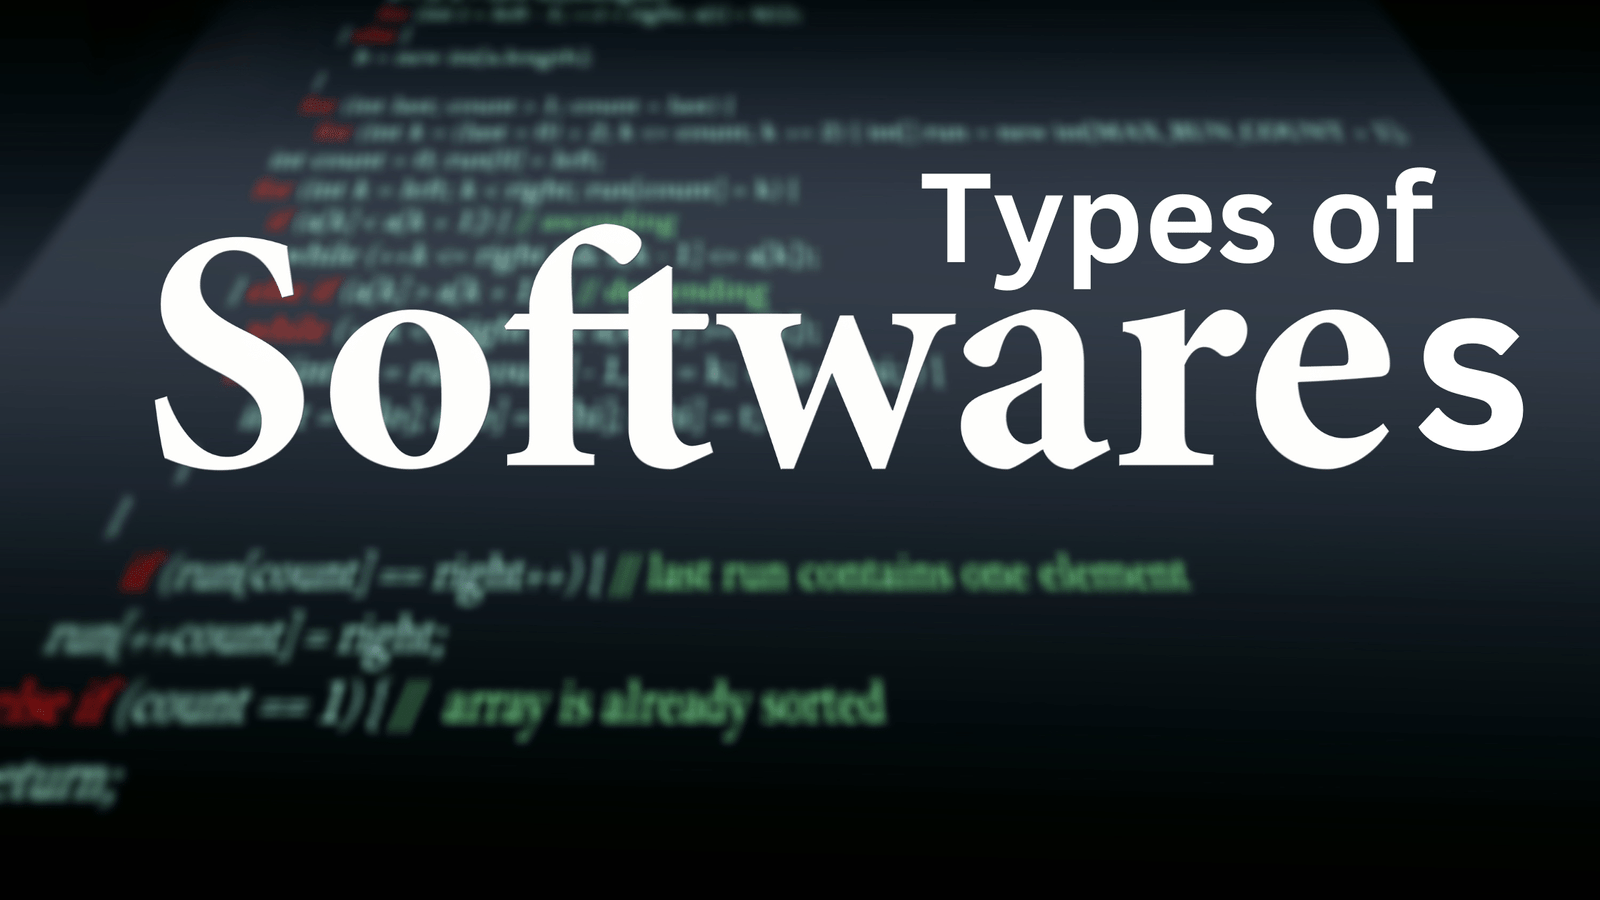 What are the 3 main software types?